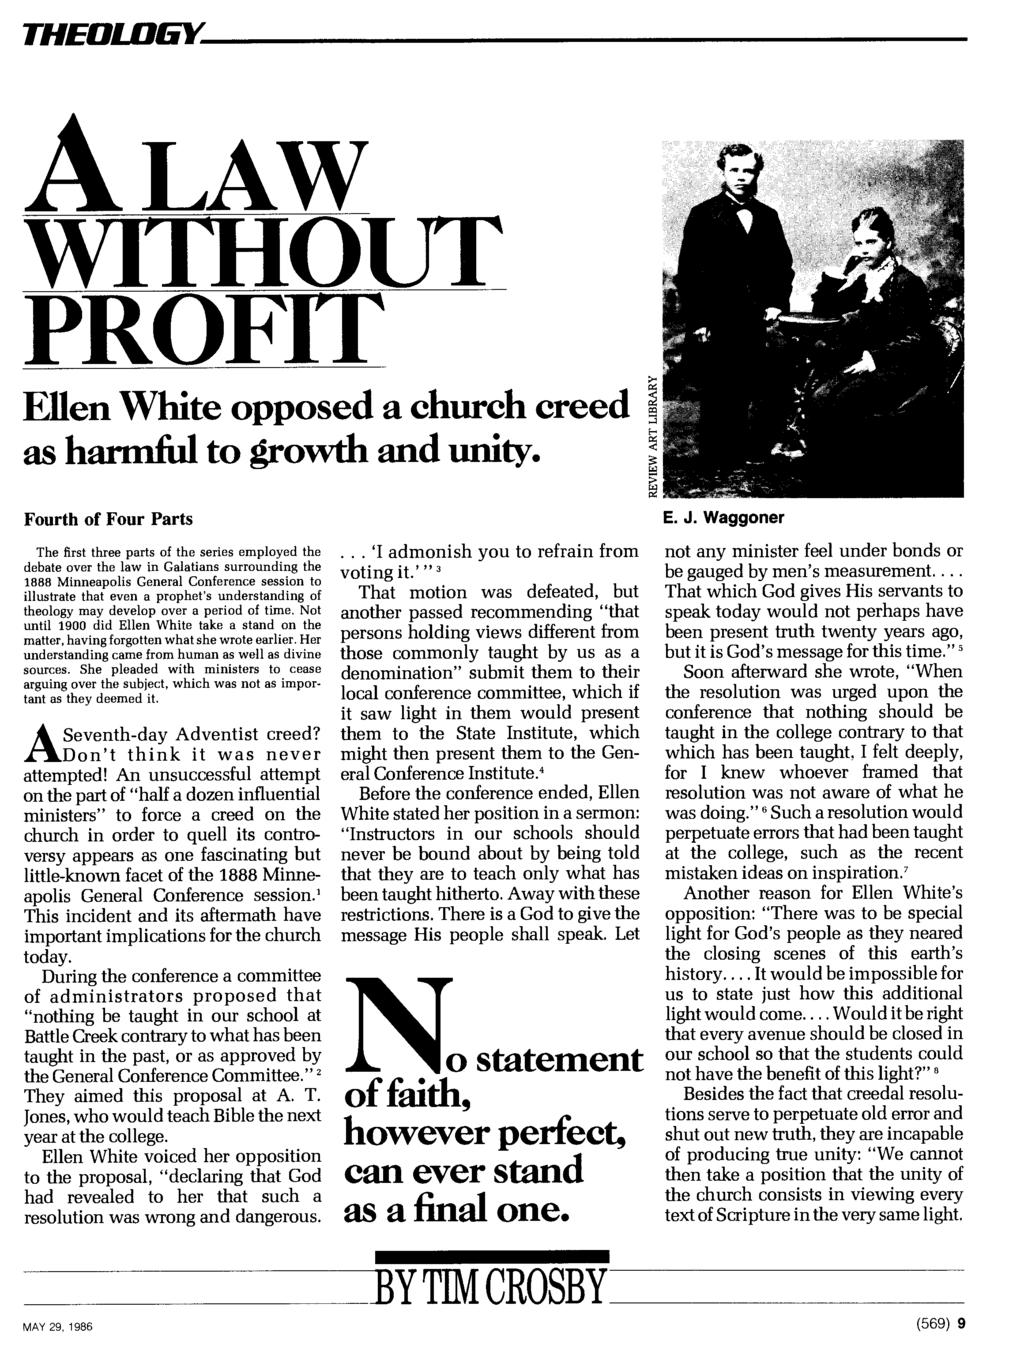 THEOLOGY A LAW wrmourr PROFIT Ellen White opposed a church creed as harmful to growth and unity.